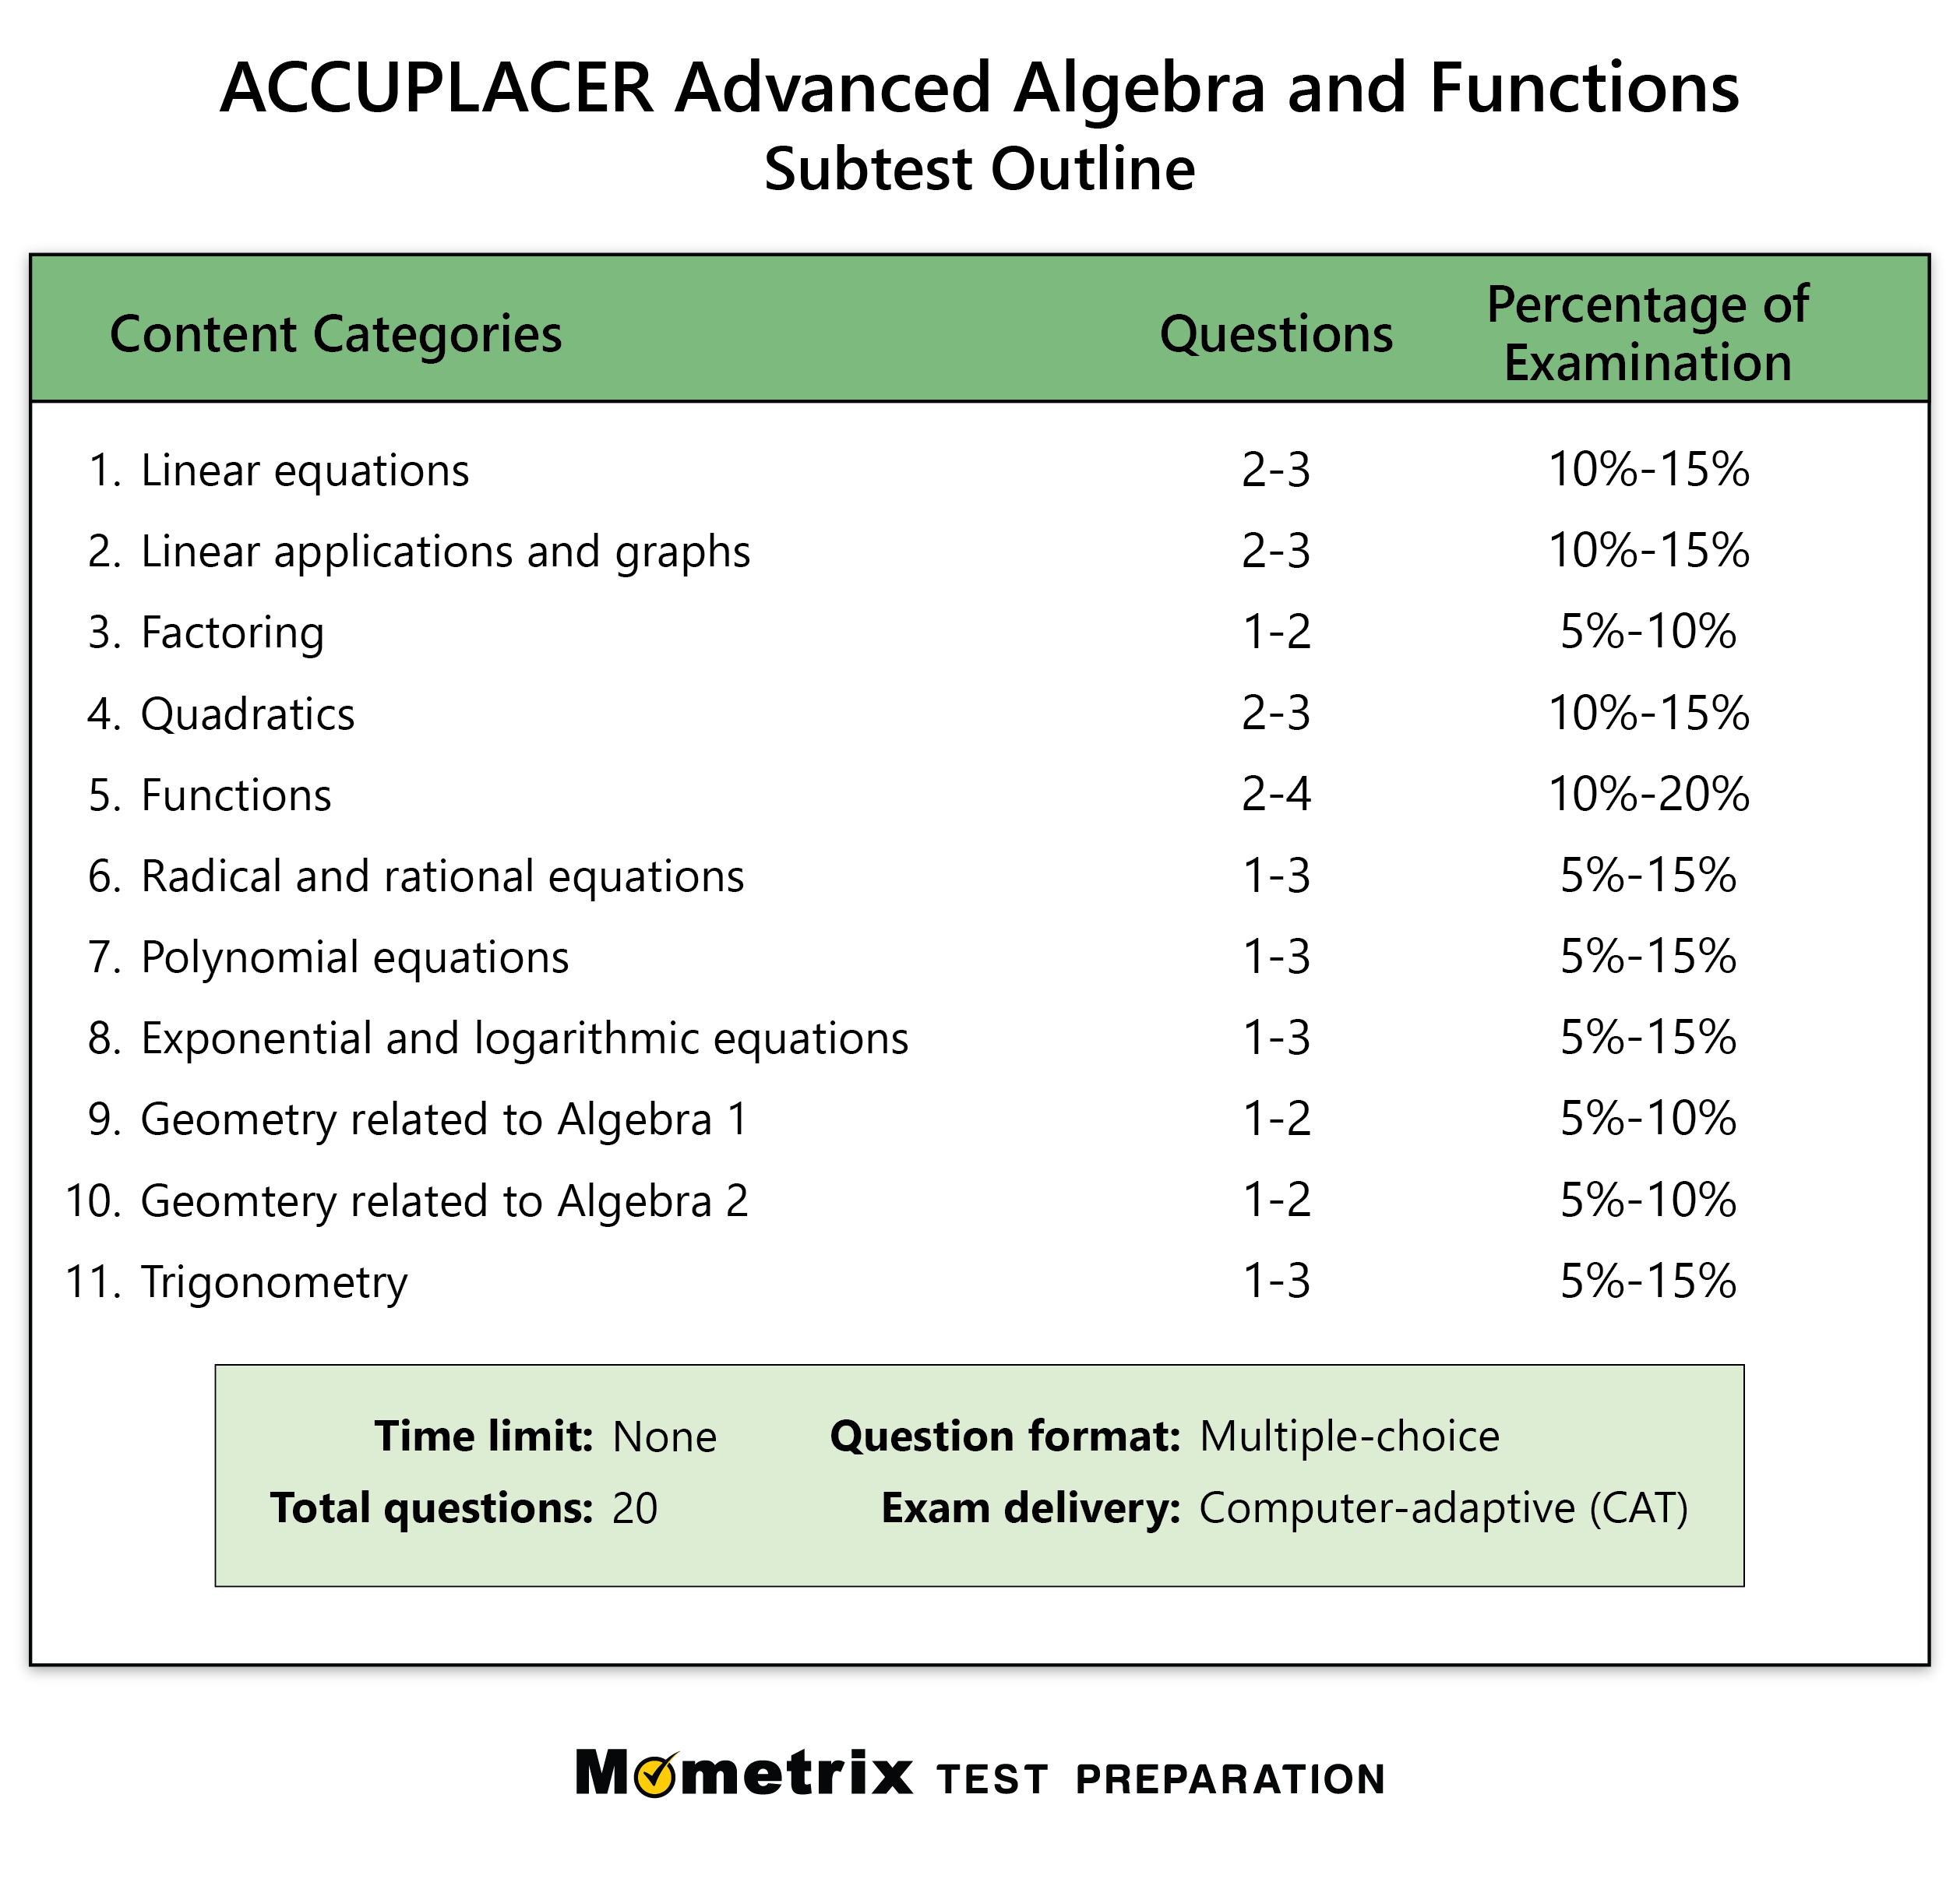 accuplacer-advanced-algebra-and-functions-practice-test